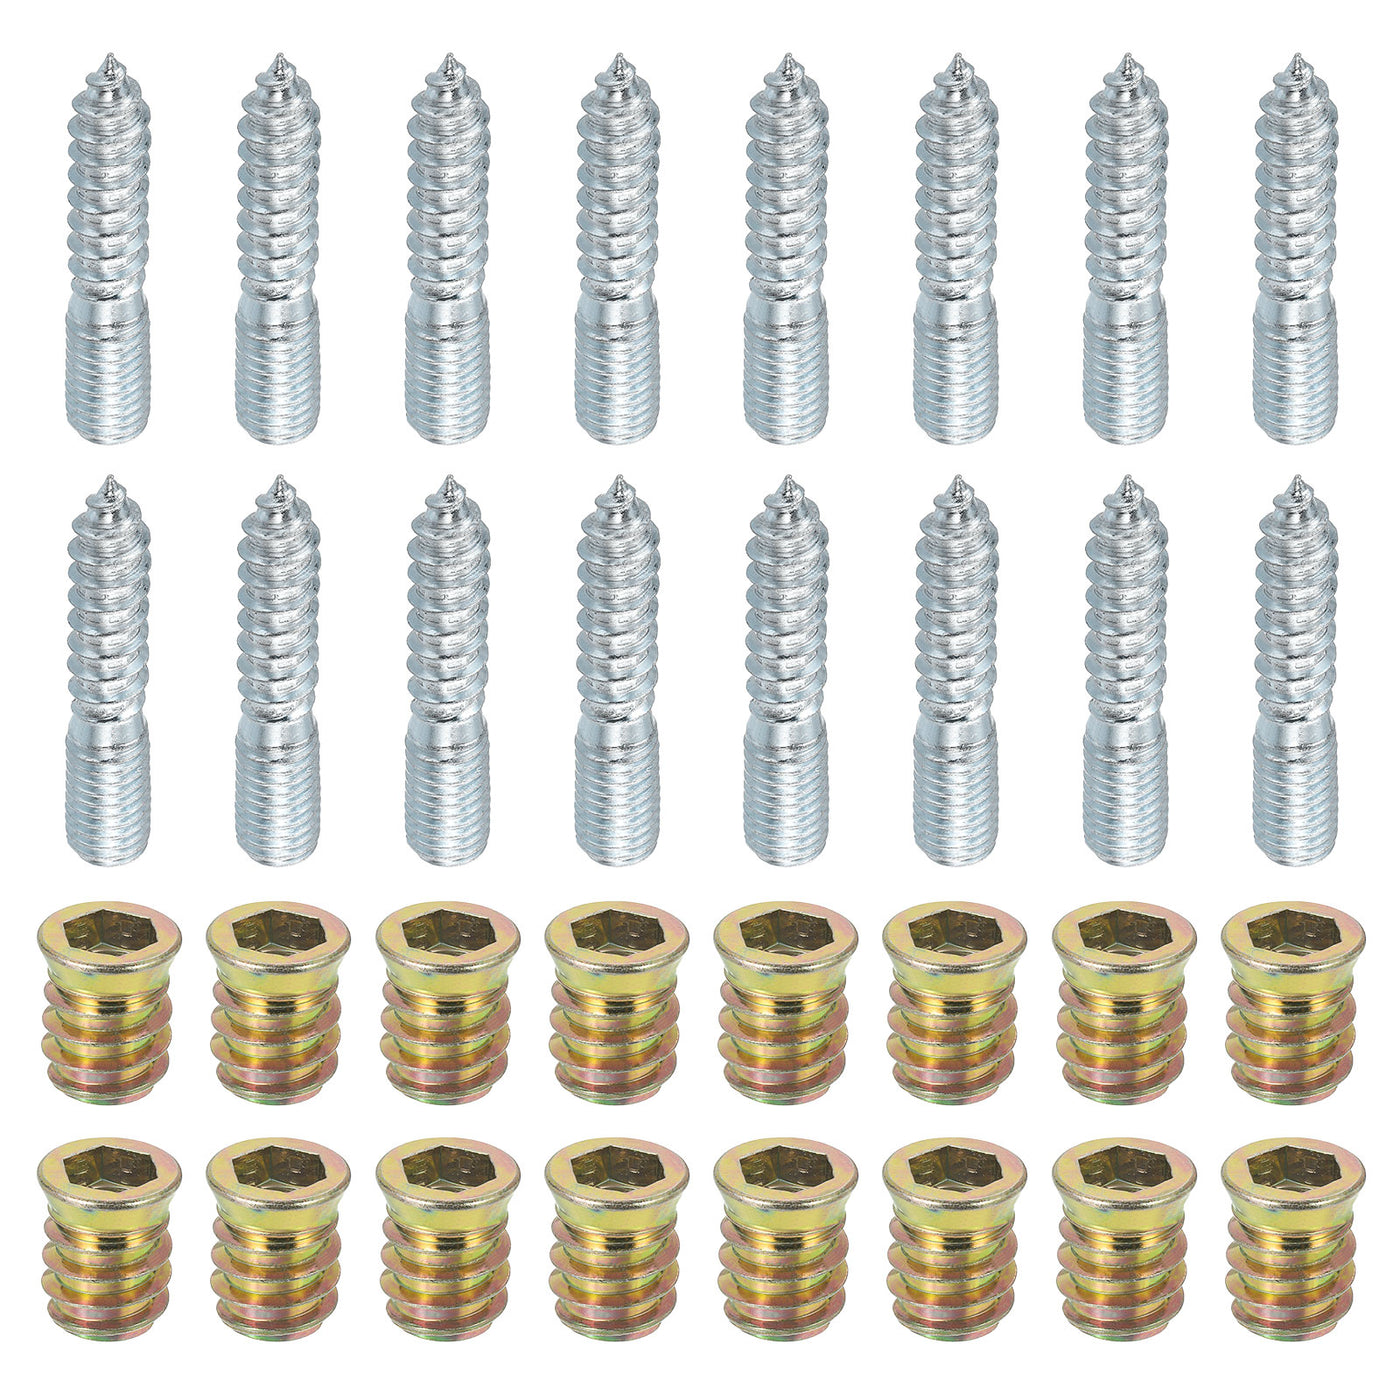 uxcell Uxcell 16pcs M10x50mm Hanger Bolts with 16pcs M10x20mm Threaded Insert Nuts Interface